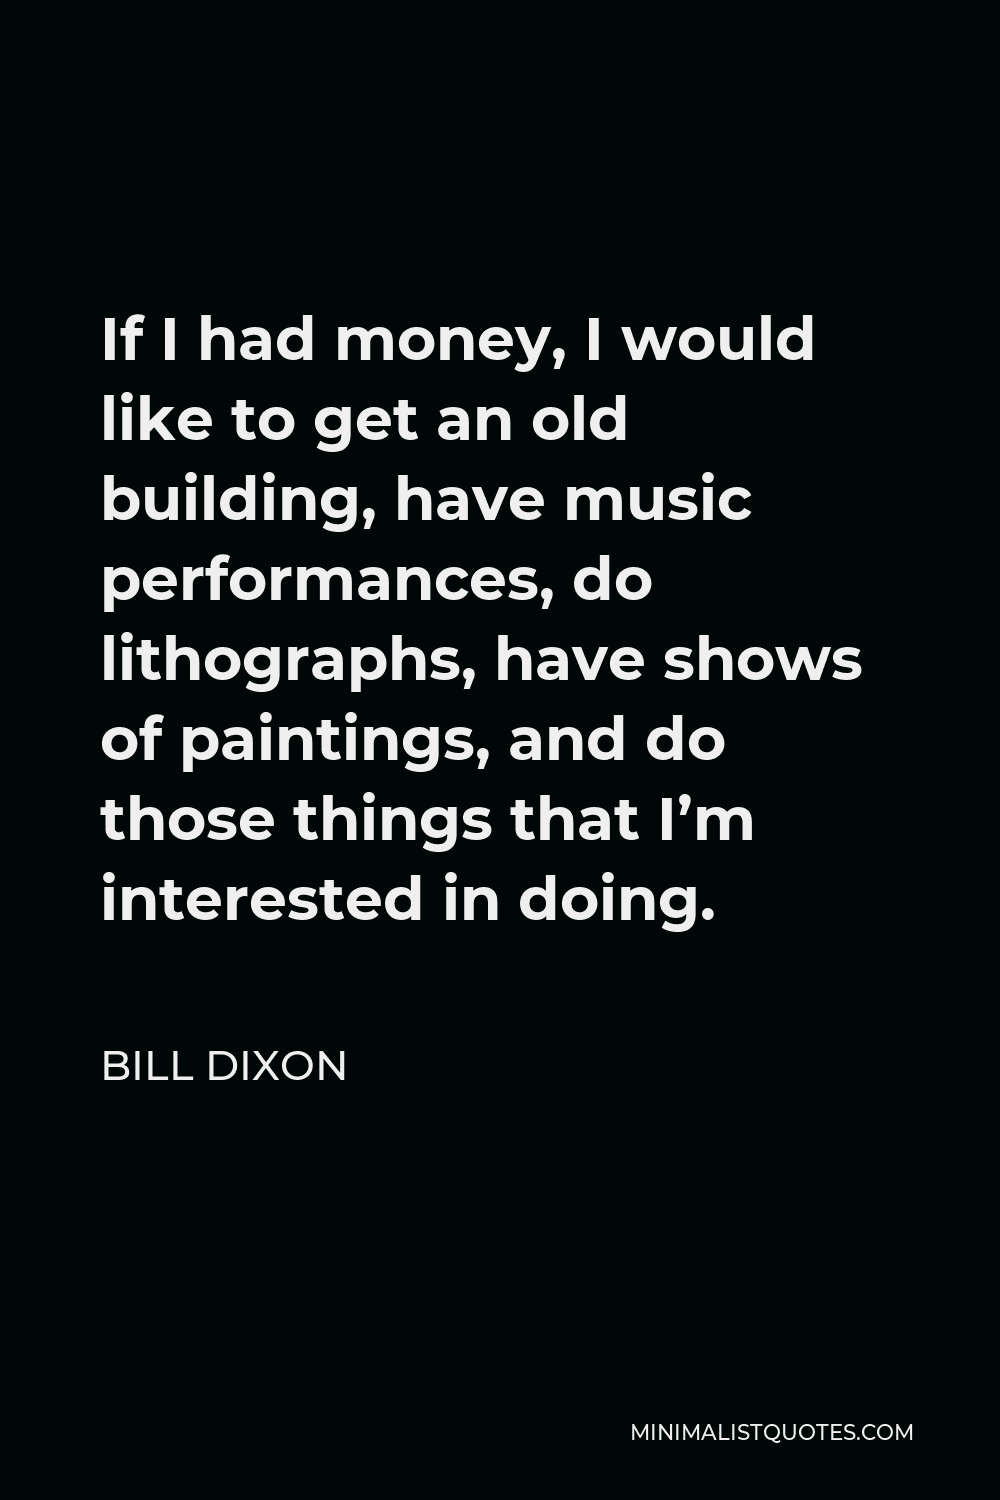 Bill Dixon Quote - If I had money, I would like to get an old building, have music performances, do lithographs, have shows of paintings, and do those things that I’m interested in doing.